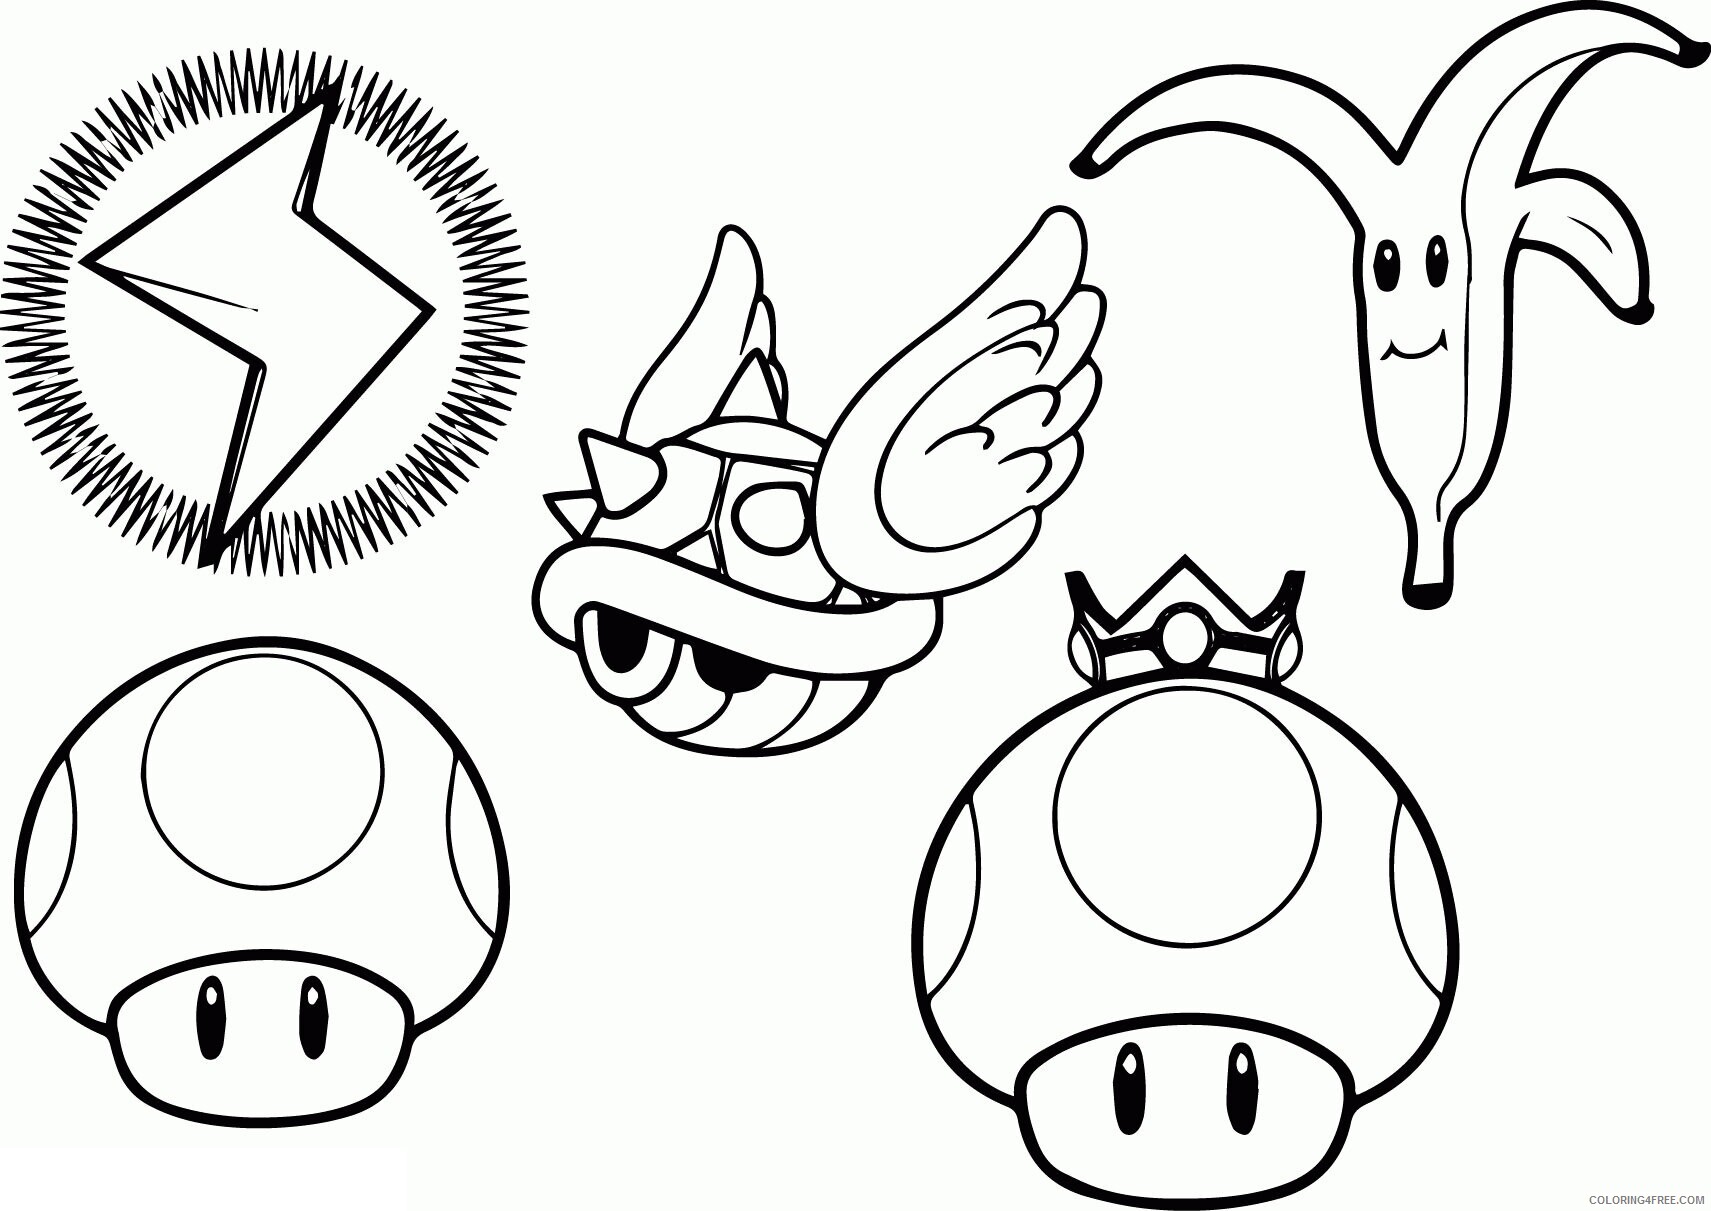 All Mario Character Coloring Pages Printable Sheets Super Mario Characters Page 2021 a 4169 Coloring4free